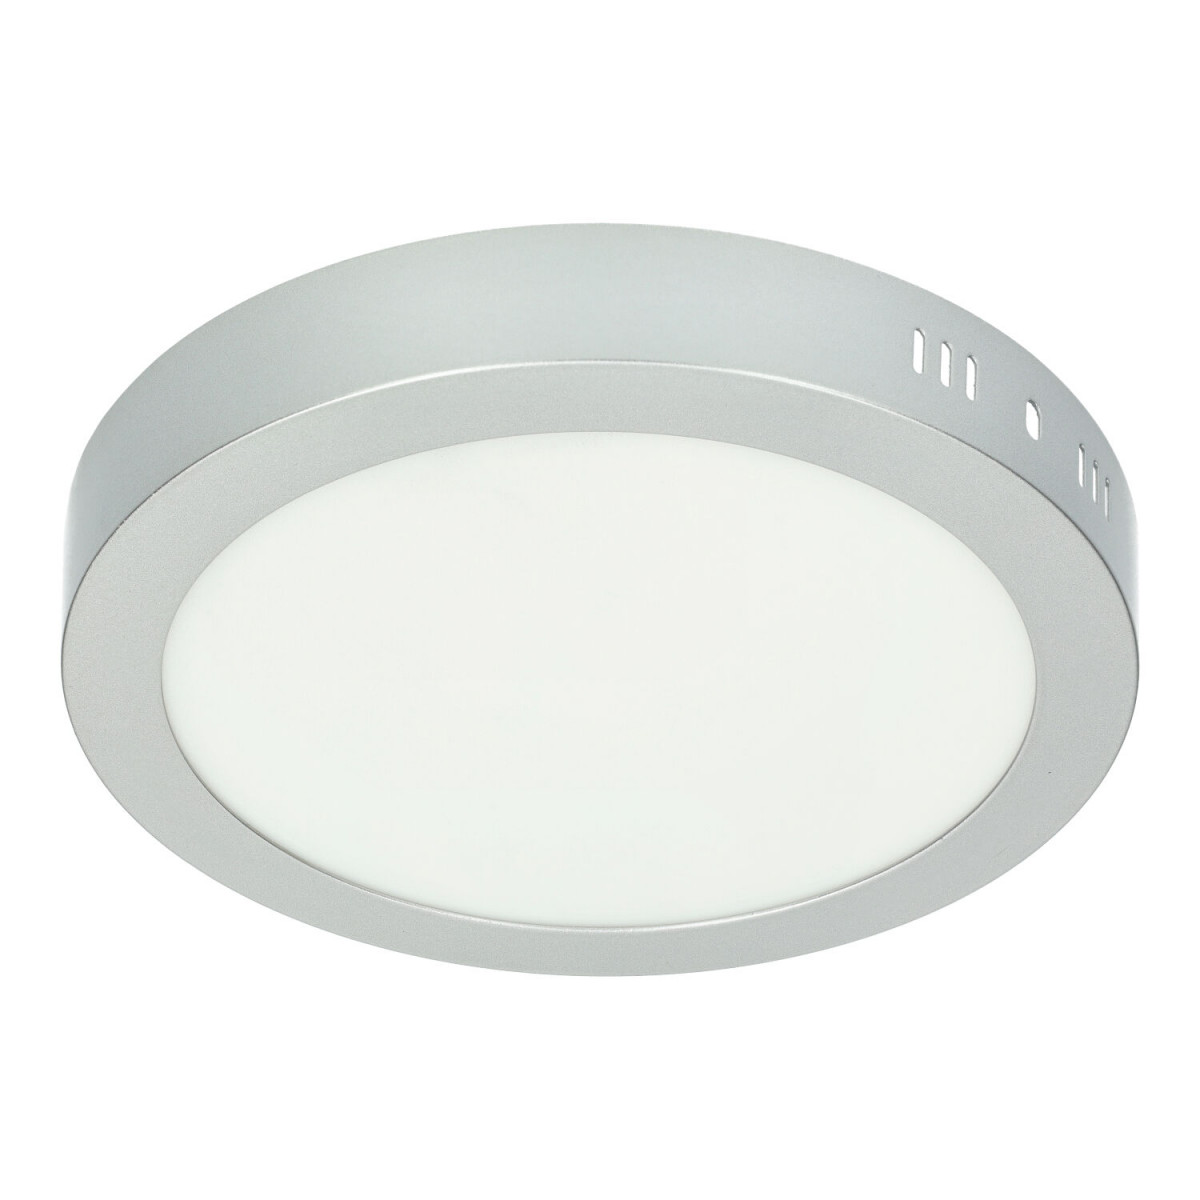 LED Ceiling Light - Round, 18W silver